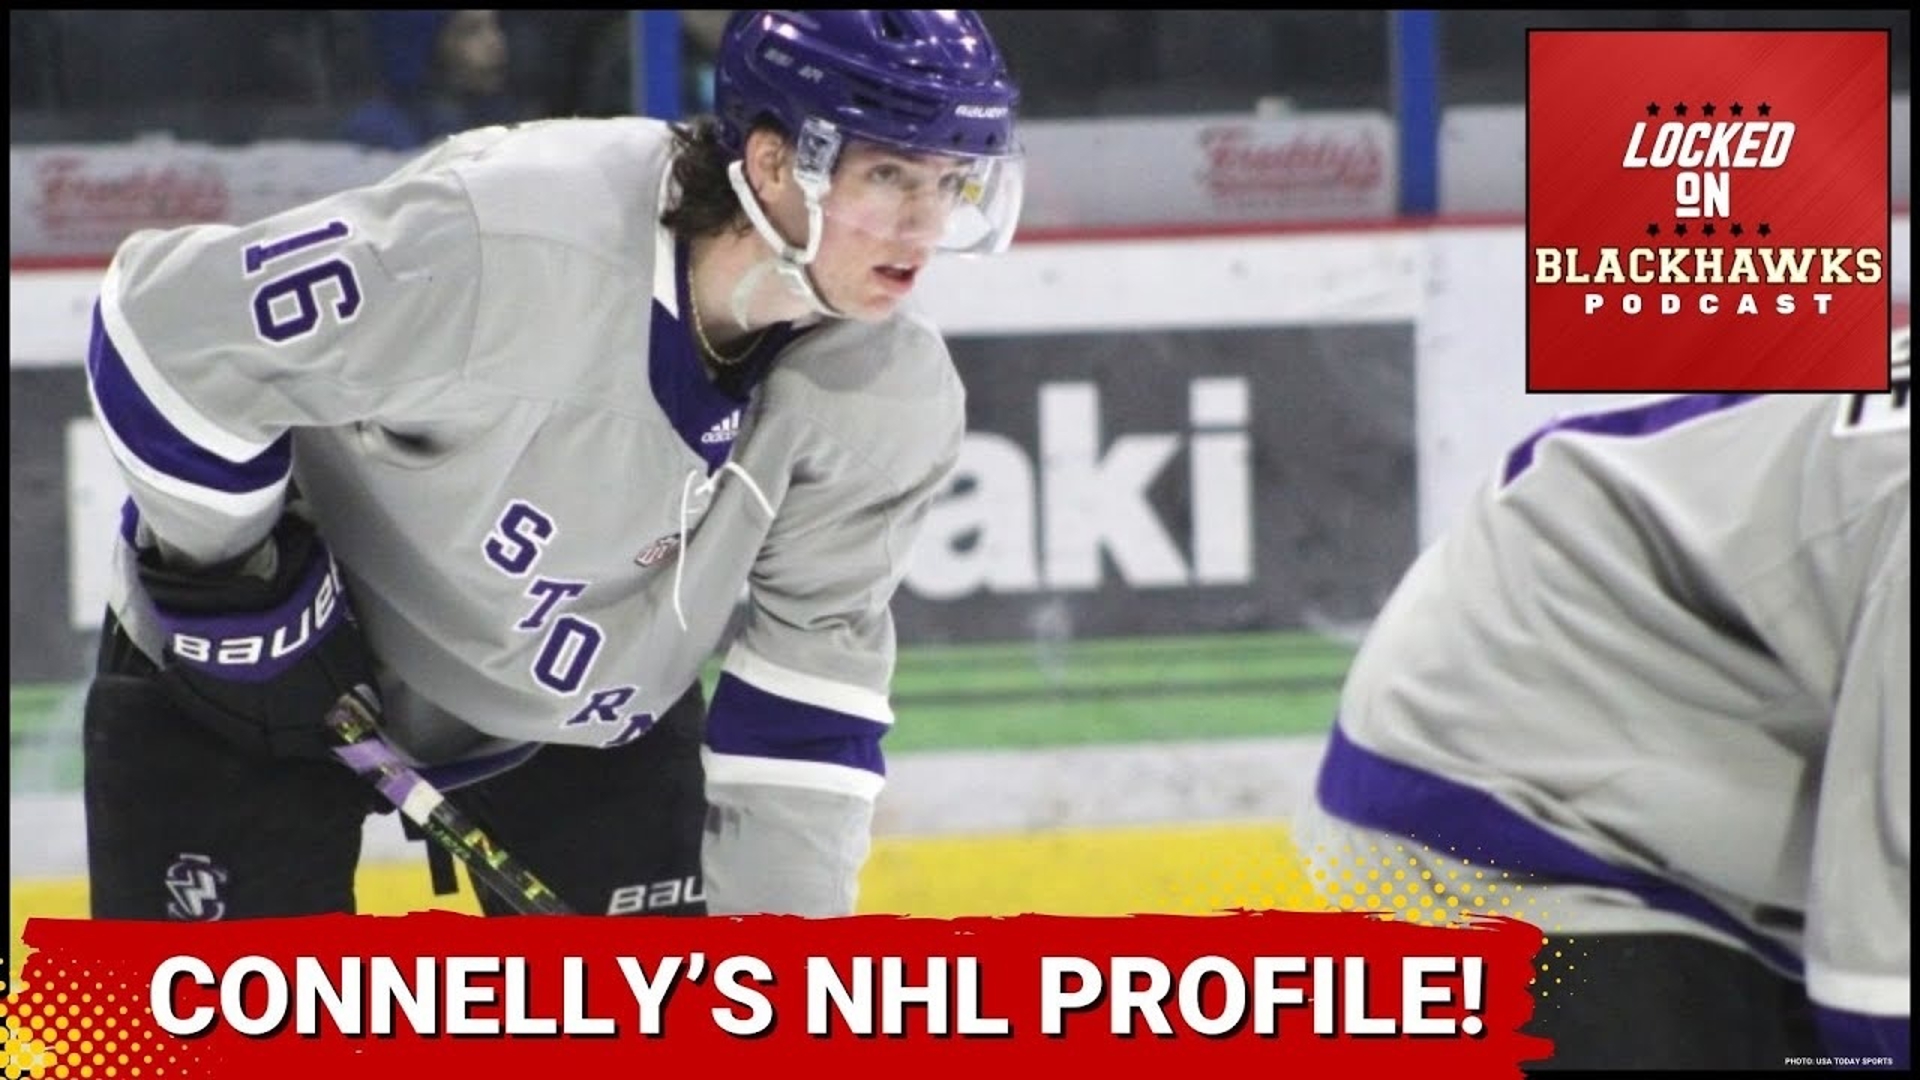 Tuesday's episode begins with forward Trevor Connelly's 2024 NHL Draft Profile!